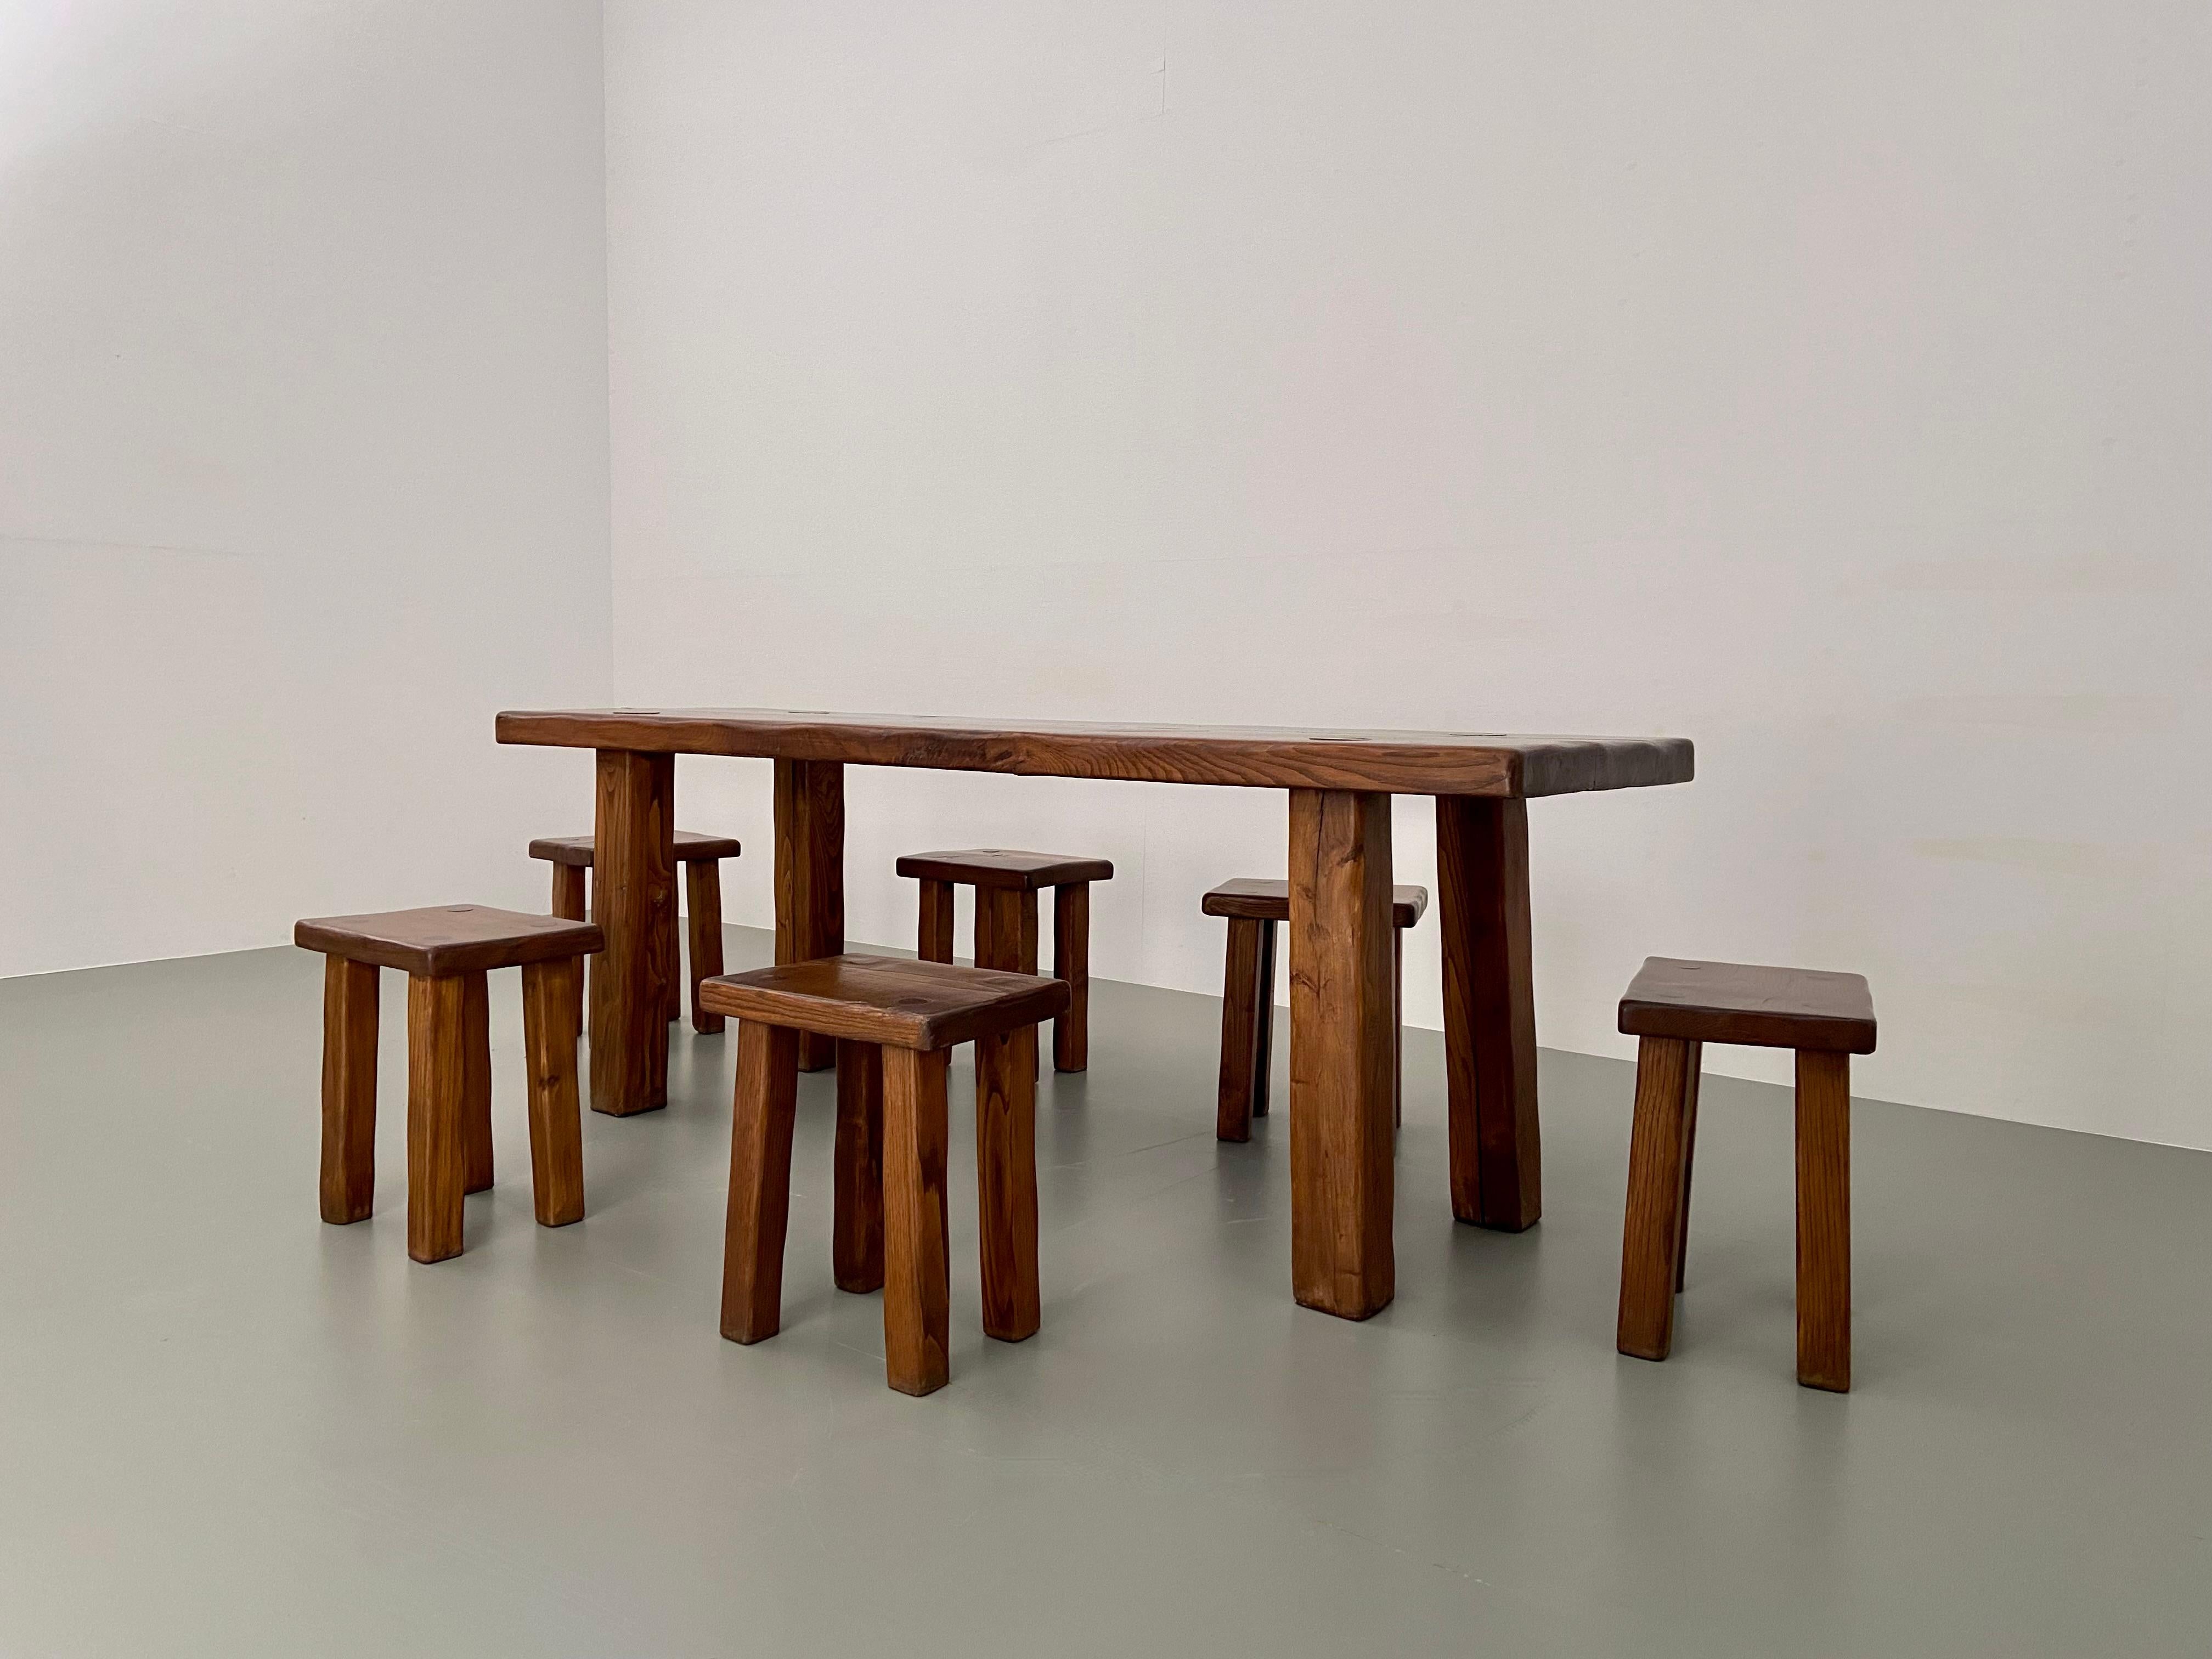 Very comfortable dining room table including six stools. The stools and table follow the same shapes creating a consistent and robust set. The table is made of solid elm and the top is quite thick and so are the squared legs, that are slightly out,